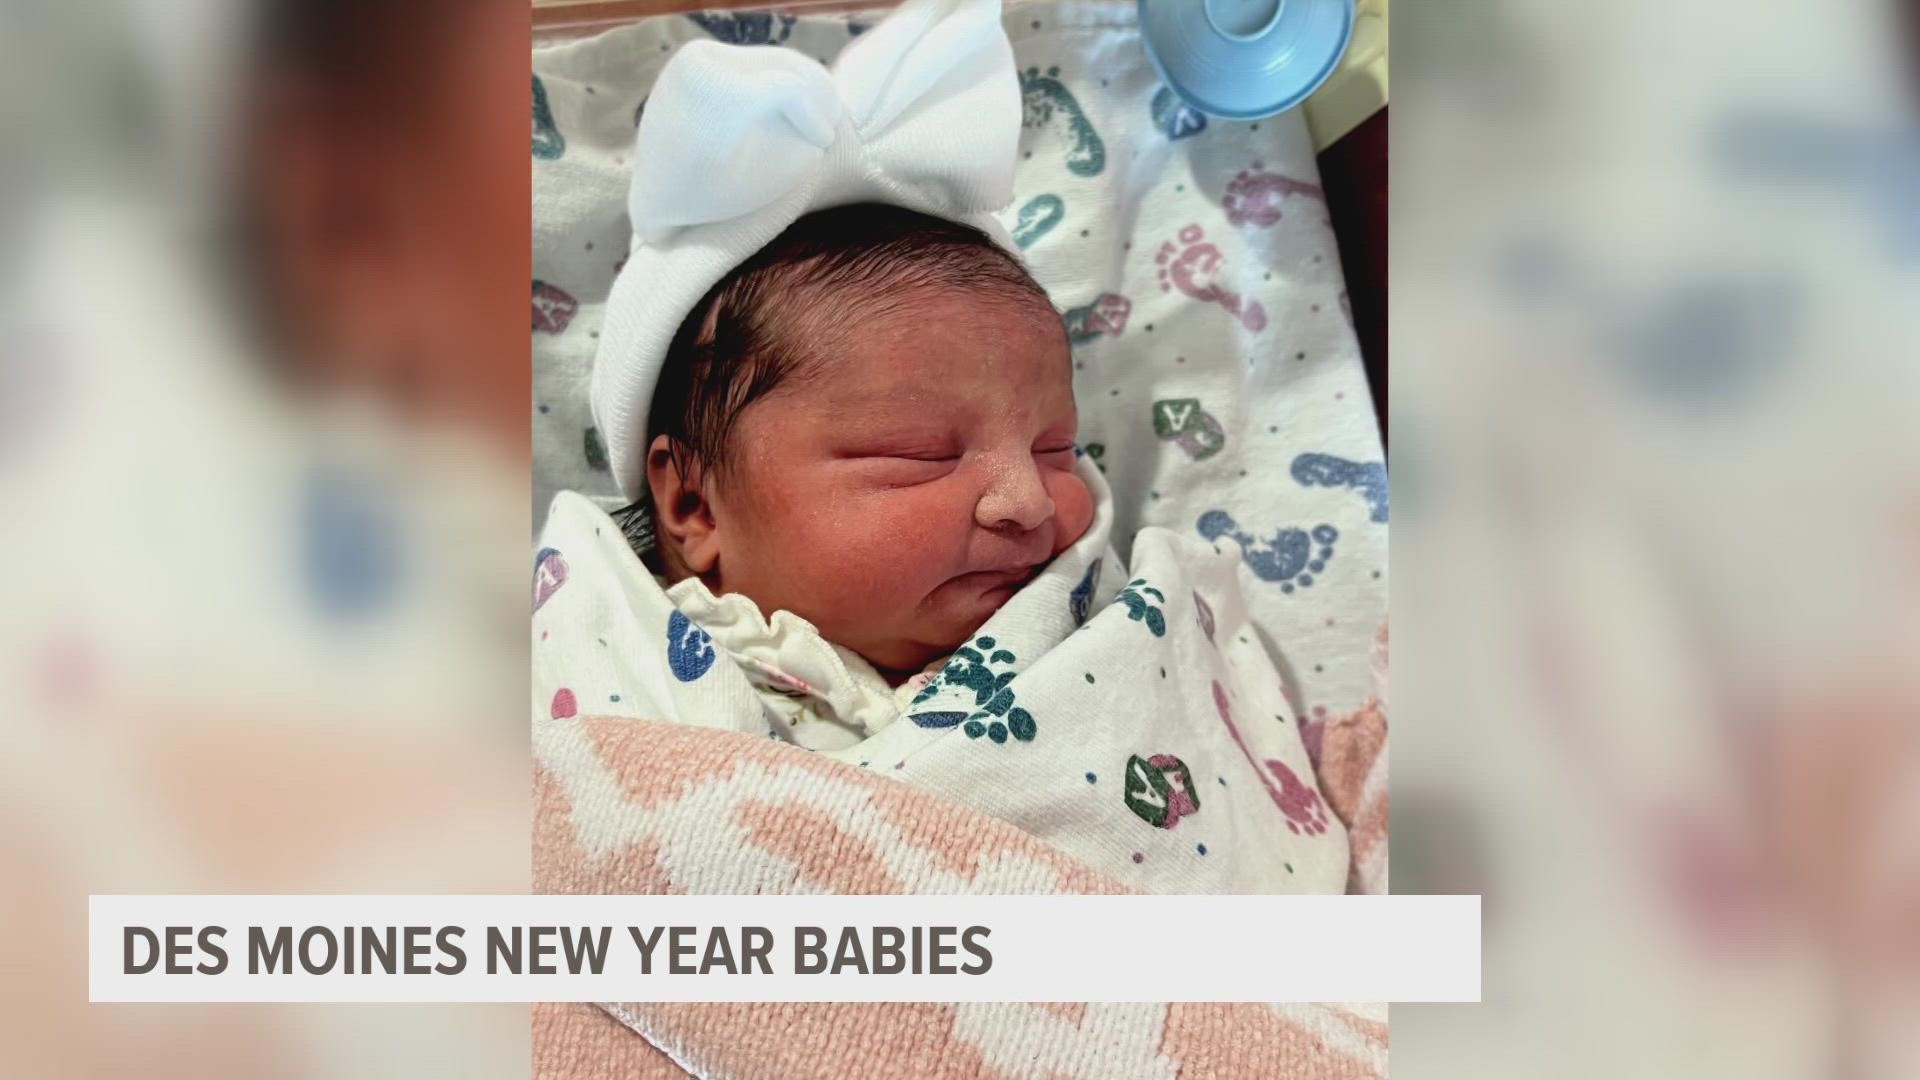 Just hours into the new year, some Iowa families welcomed babies into the world.